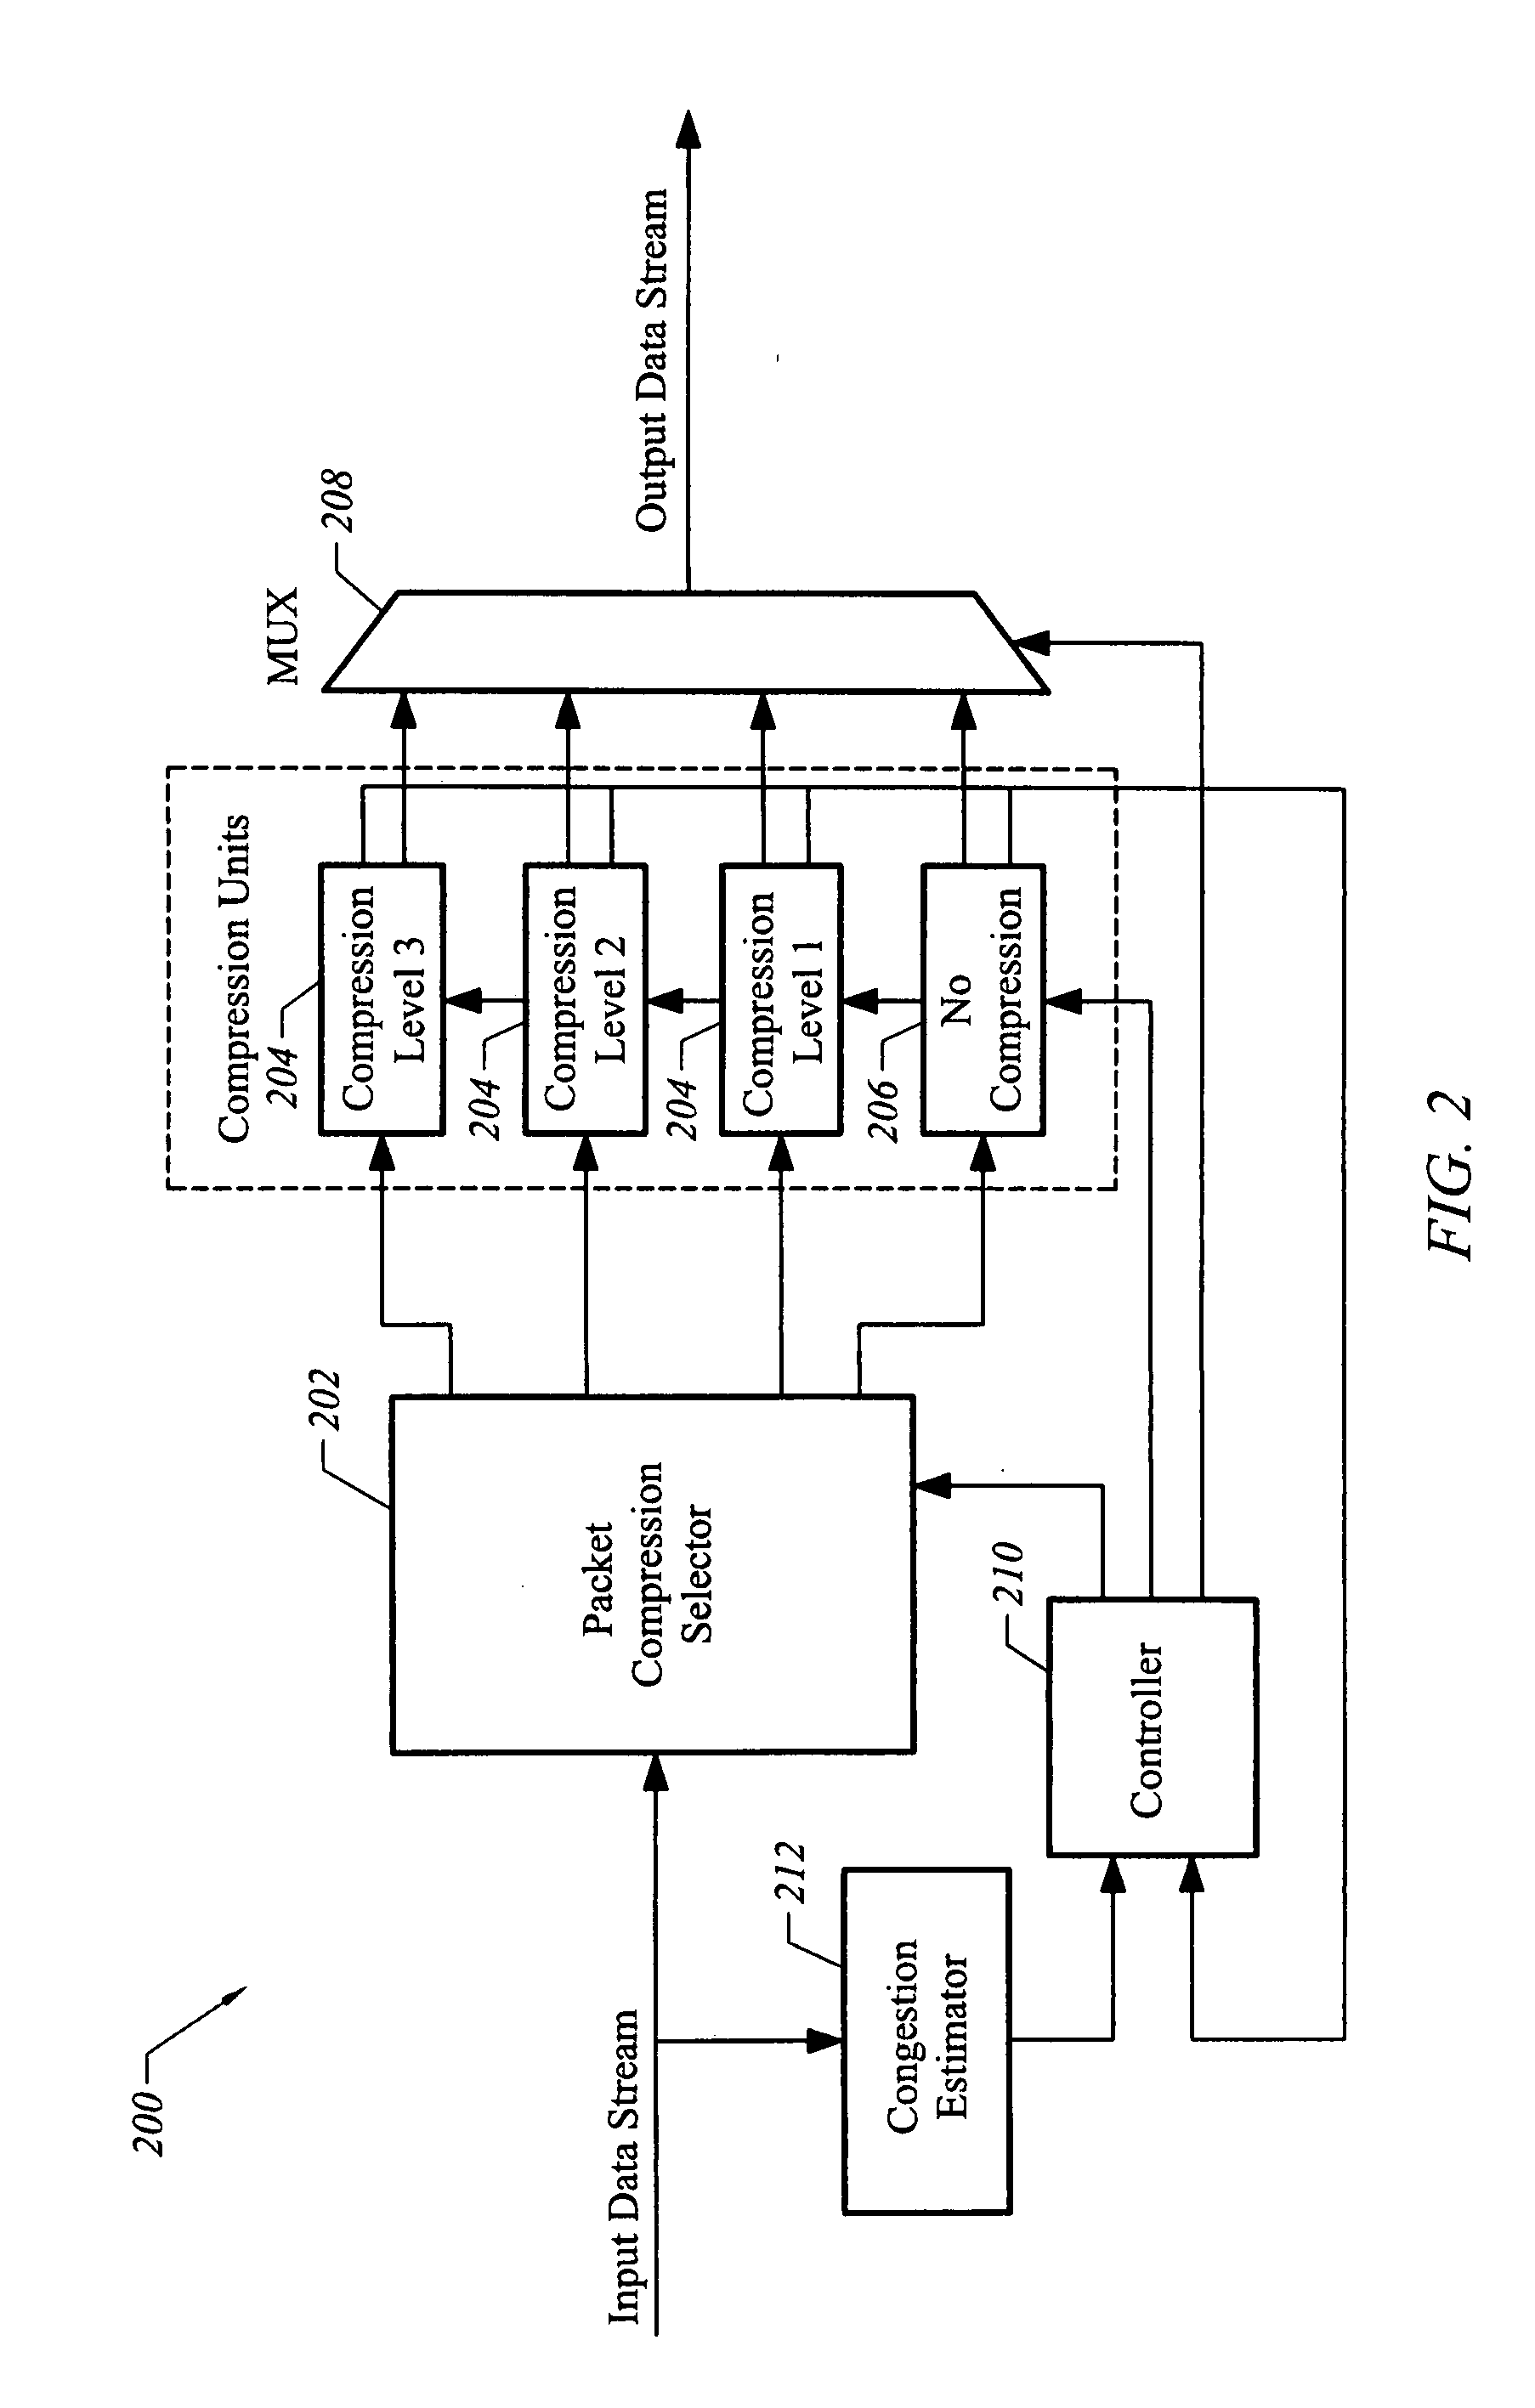 Communication system with priority data compression